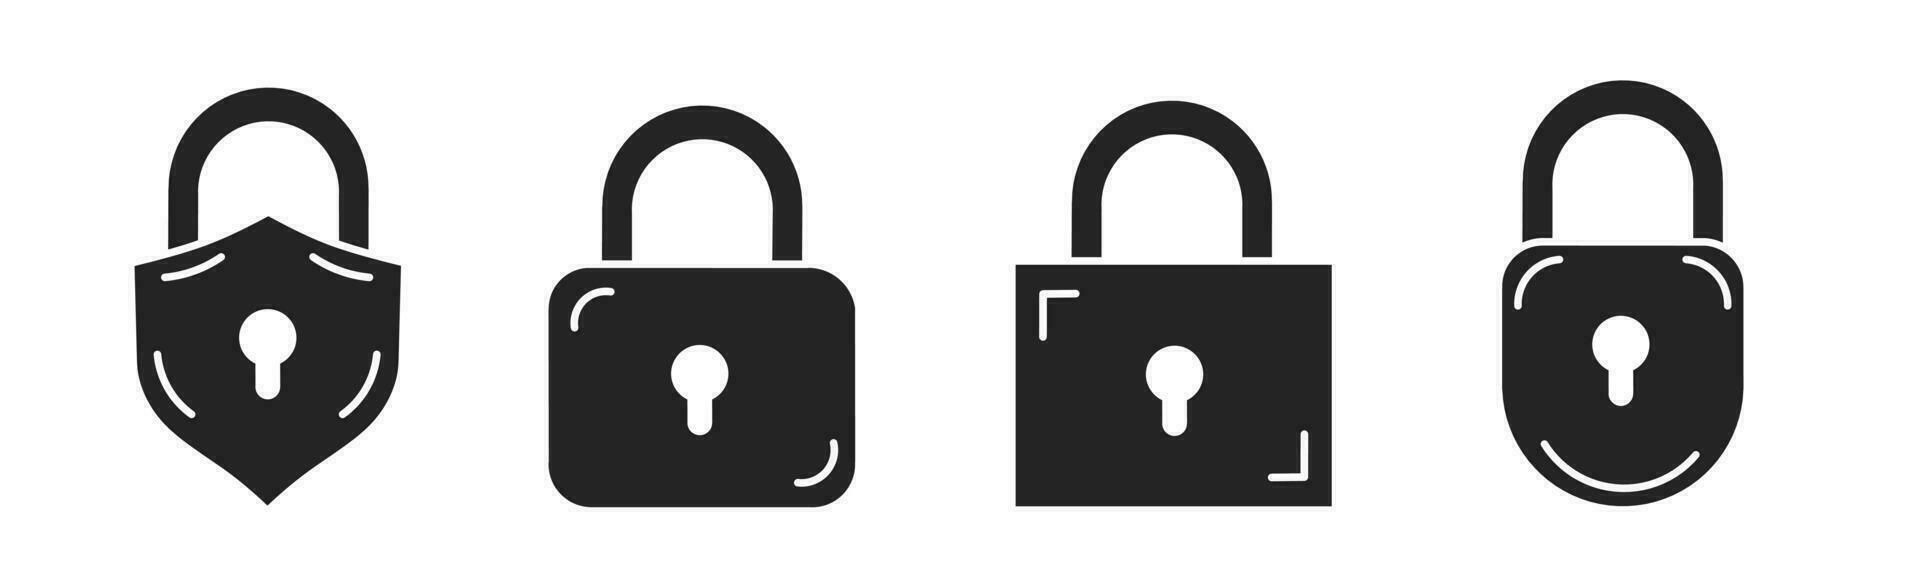 Set of illustrations about padlock icon. Stock vector. vector